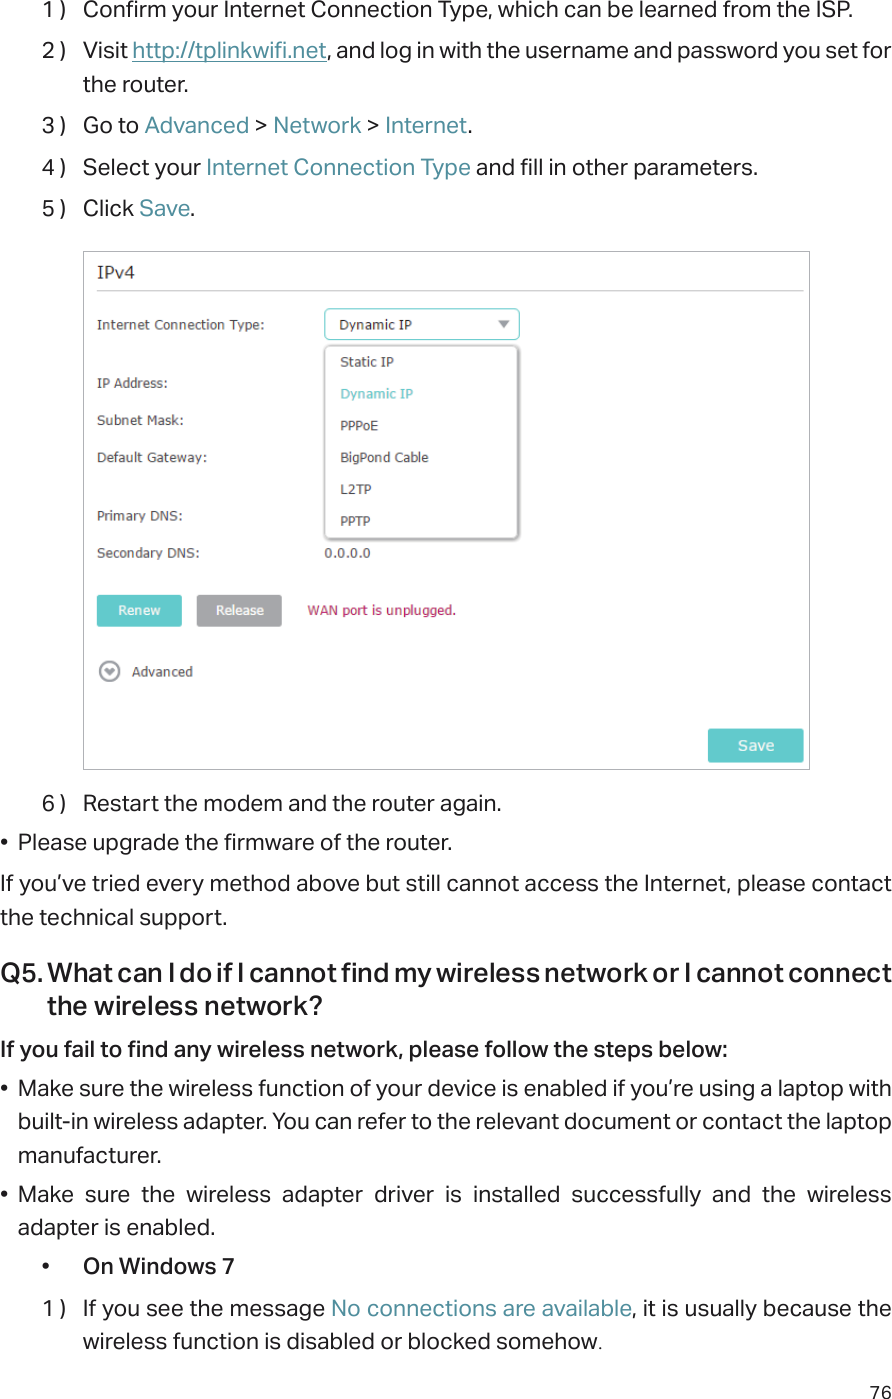 761 )  Confirm your Internet Connection Type, which can be learned from the ISP.2 )  Visit http://tplinkwifi.net, and log in with the username and password you set for the router.3 )  Go to Advanced &gt; Network &gt; Internet.4 )  Select your Internet Connection Type and fill in other parameters.5 )  Click Save.6 )  Restart the modem and the router again.•  Please upgrade the firmware of the router.If you’ve tried every method above but still cannot access the Internet, please contact the technical support.Q5. What can I do if I cannot find my wireless network or I cannot connect the wireless network?If you fail to find any wireless network, please follow the steps below:•  Make sure the wireless function of your device is enabled if you’re using a laptop with built-in wireless adapter. You can refer to the relevant document or contact the laptop manufacturer.•  Make sure the wireless adapter driver is installed successfully and the wireless adapter is enabled.•  On Windows 71 )  If you see the message No connections are available, it is usually because the wireless function is disabled or blocked somehow.